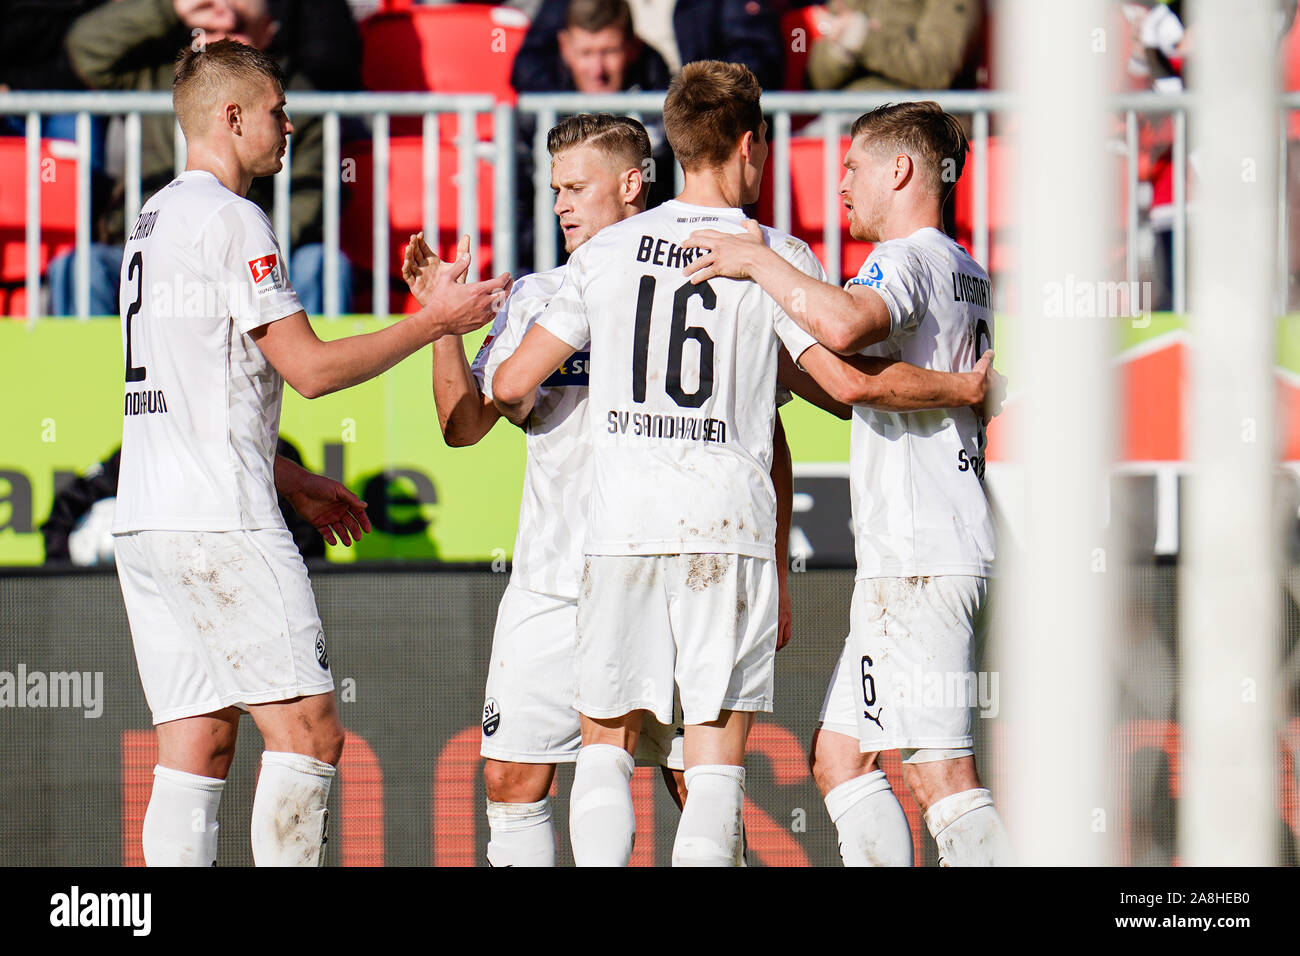 Sandhausen, Germany. 09th Nov, 2019. Soccer: 2nd Bundesliga, SV Sandhausen - SpVgg Greuther Fürth, 13th matchday, in the Hardtwaldstadion. Sandhausen's penalty kicker Kevin Behrens (2nd from right) cheers with his team-mates over the goal to 1:1. Credit: Uwe Anspach/dpa - IMPORTANT NOTE: In accordance with the requirements of the DFL Deutsche Fußball Liga or the DFB Deutscher Fußball-Bund, it is prohibited to use or have used photographs taken in the stadium and/or the match in the form of sequence images and/or video-like photo sequences./dpa/Alamy Live News Stock Photo